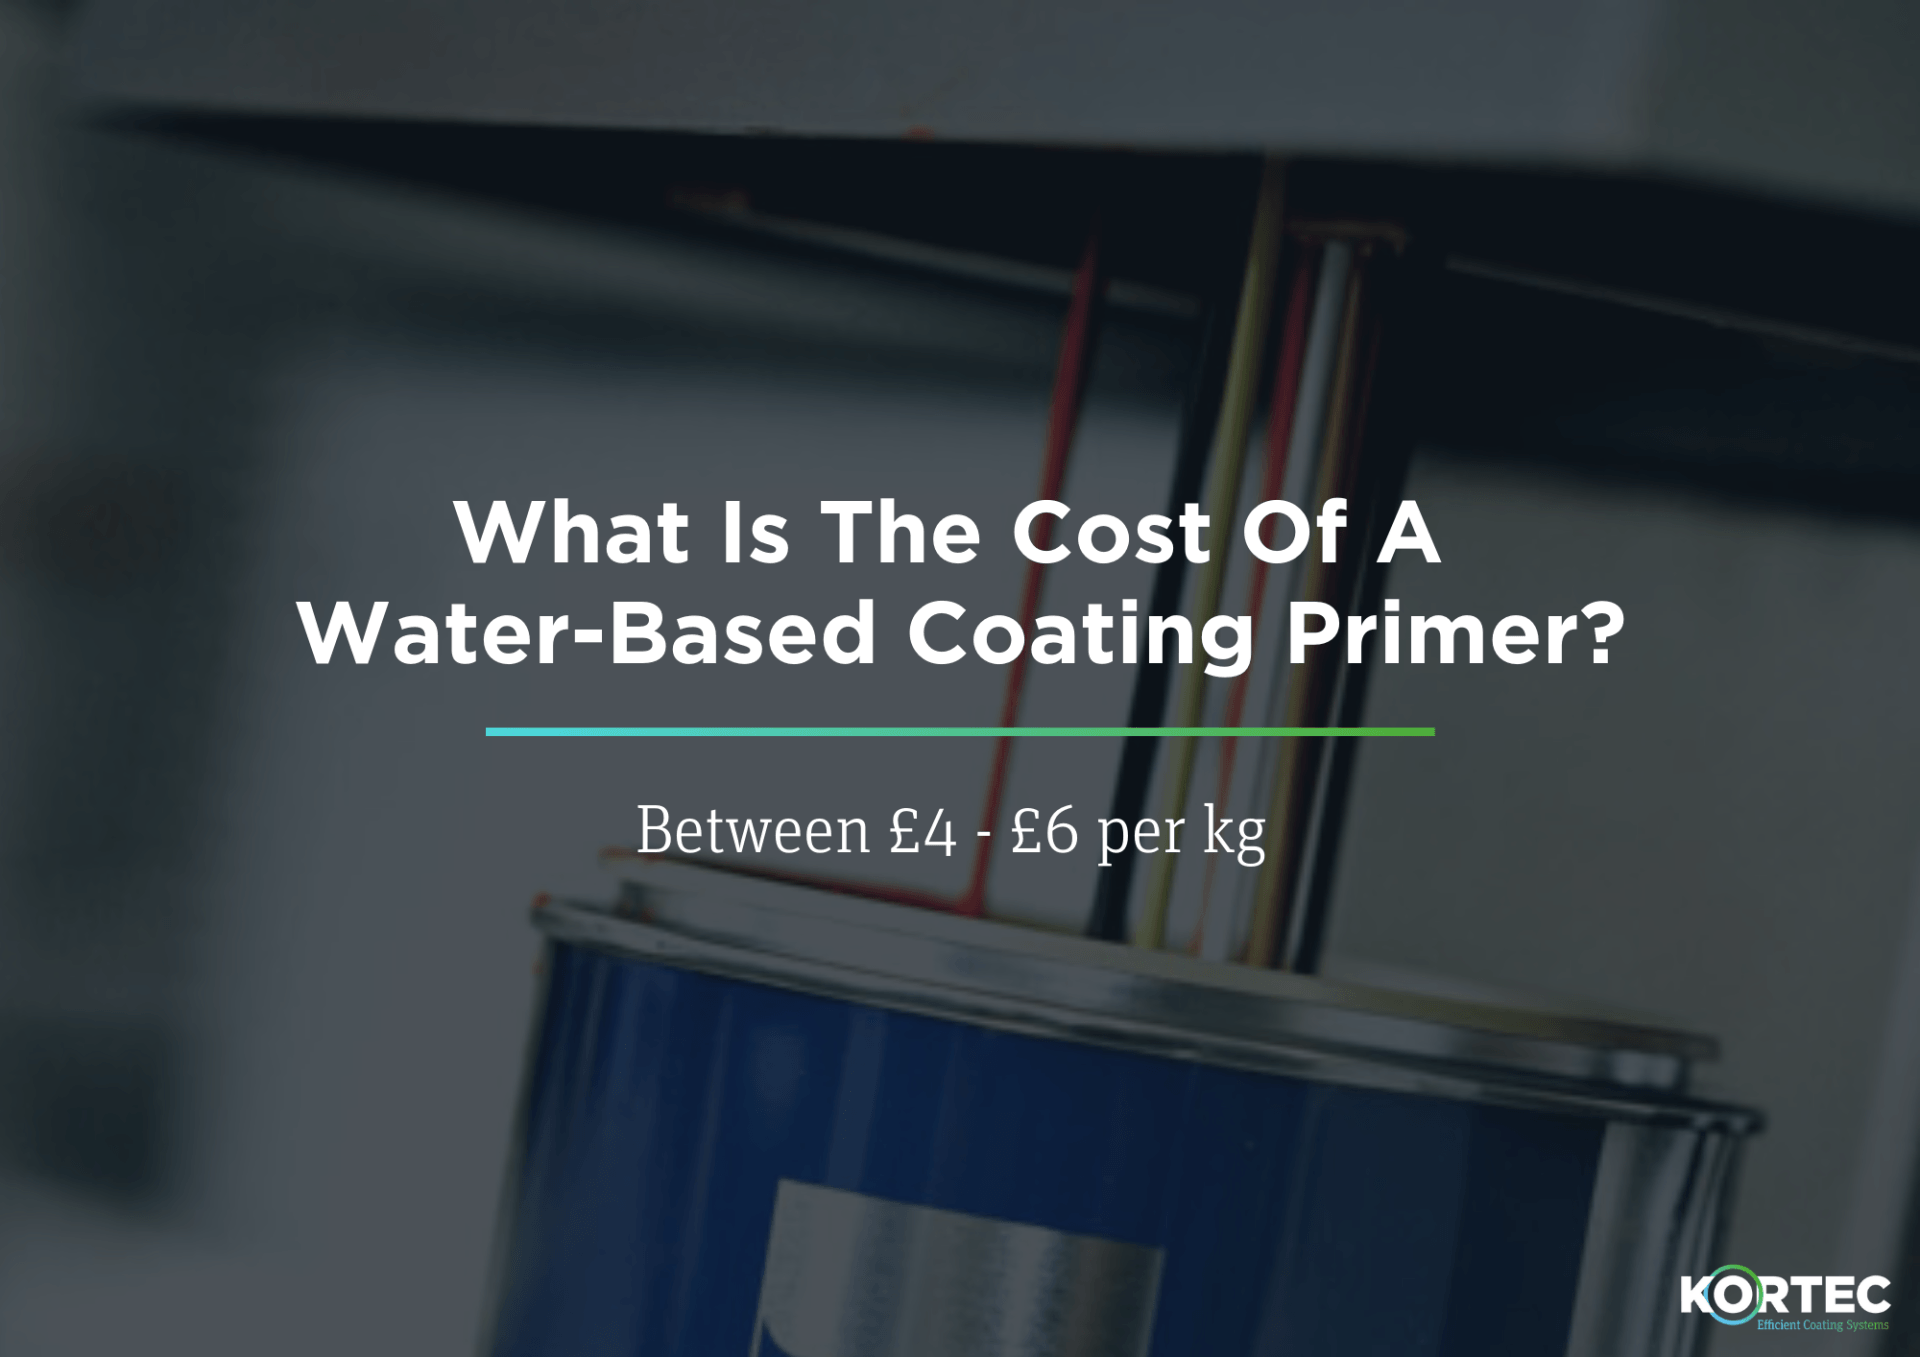 Water-Based Coatings Systems | Kortec